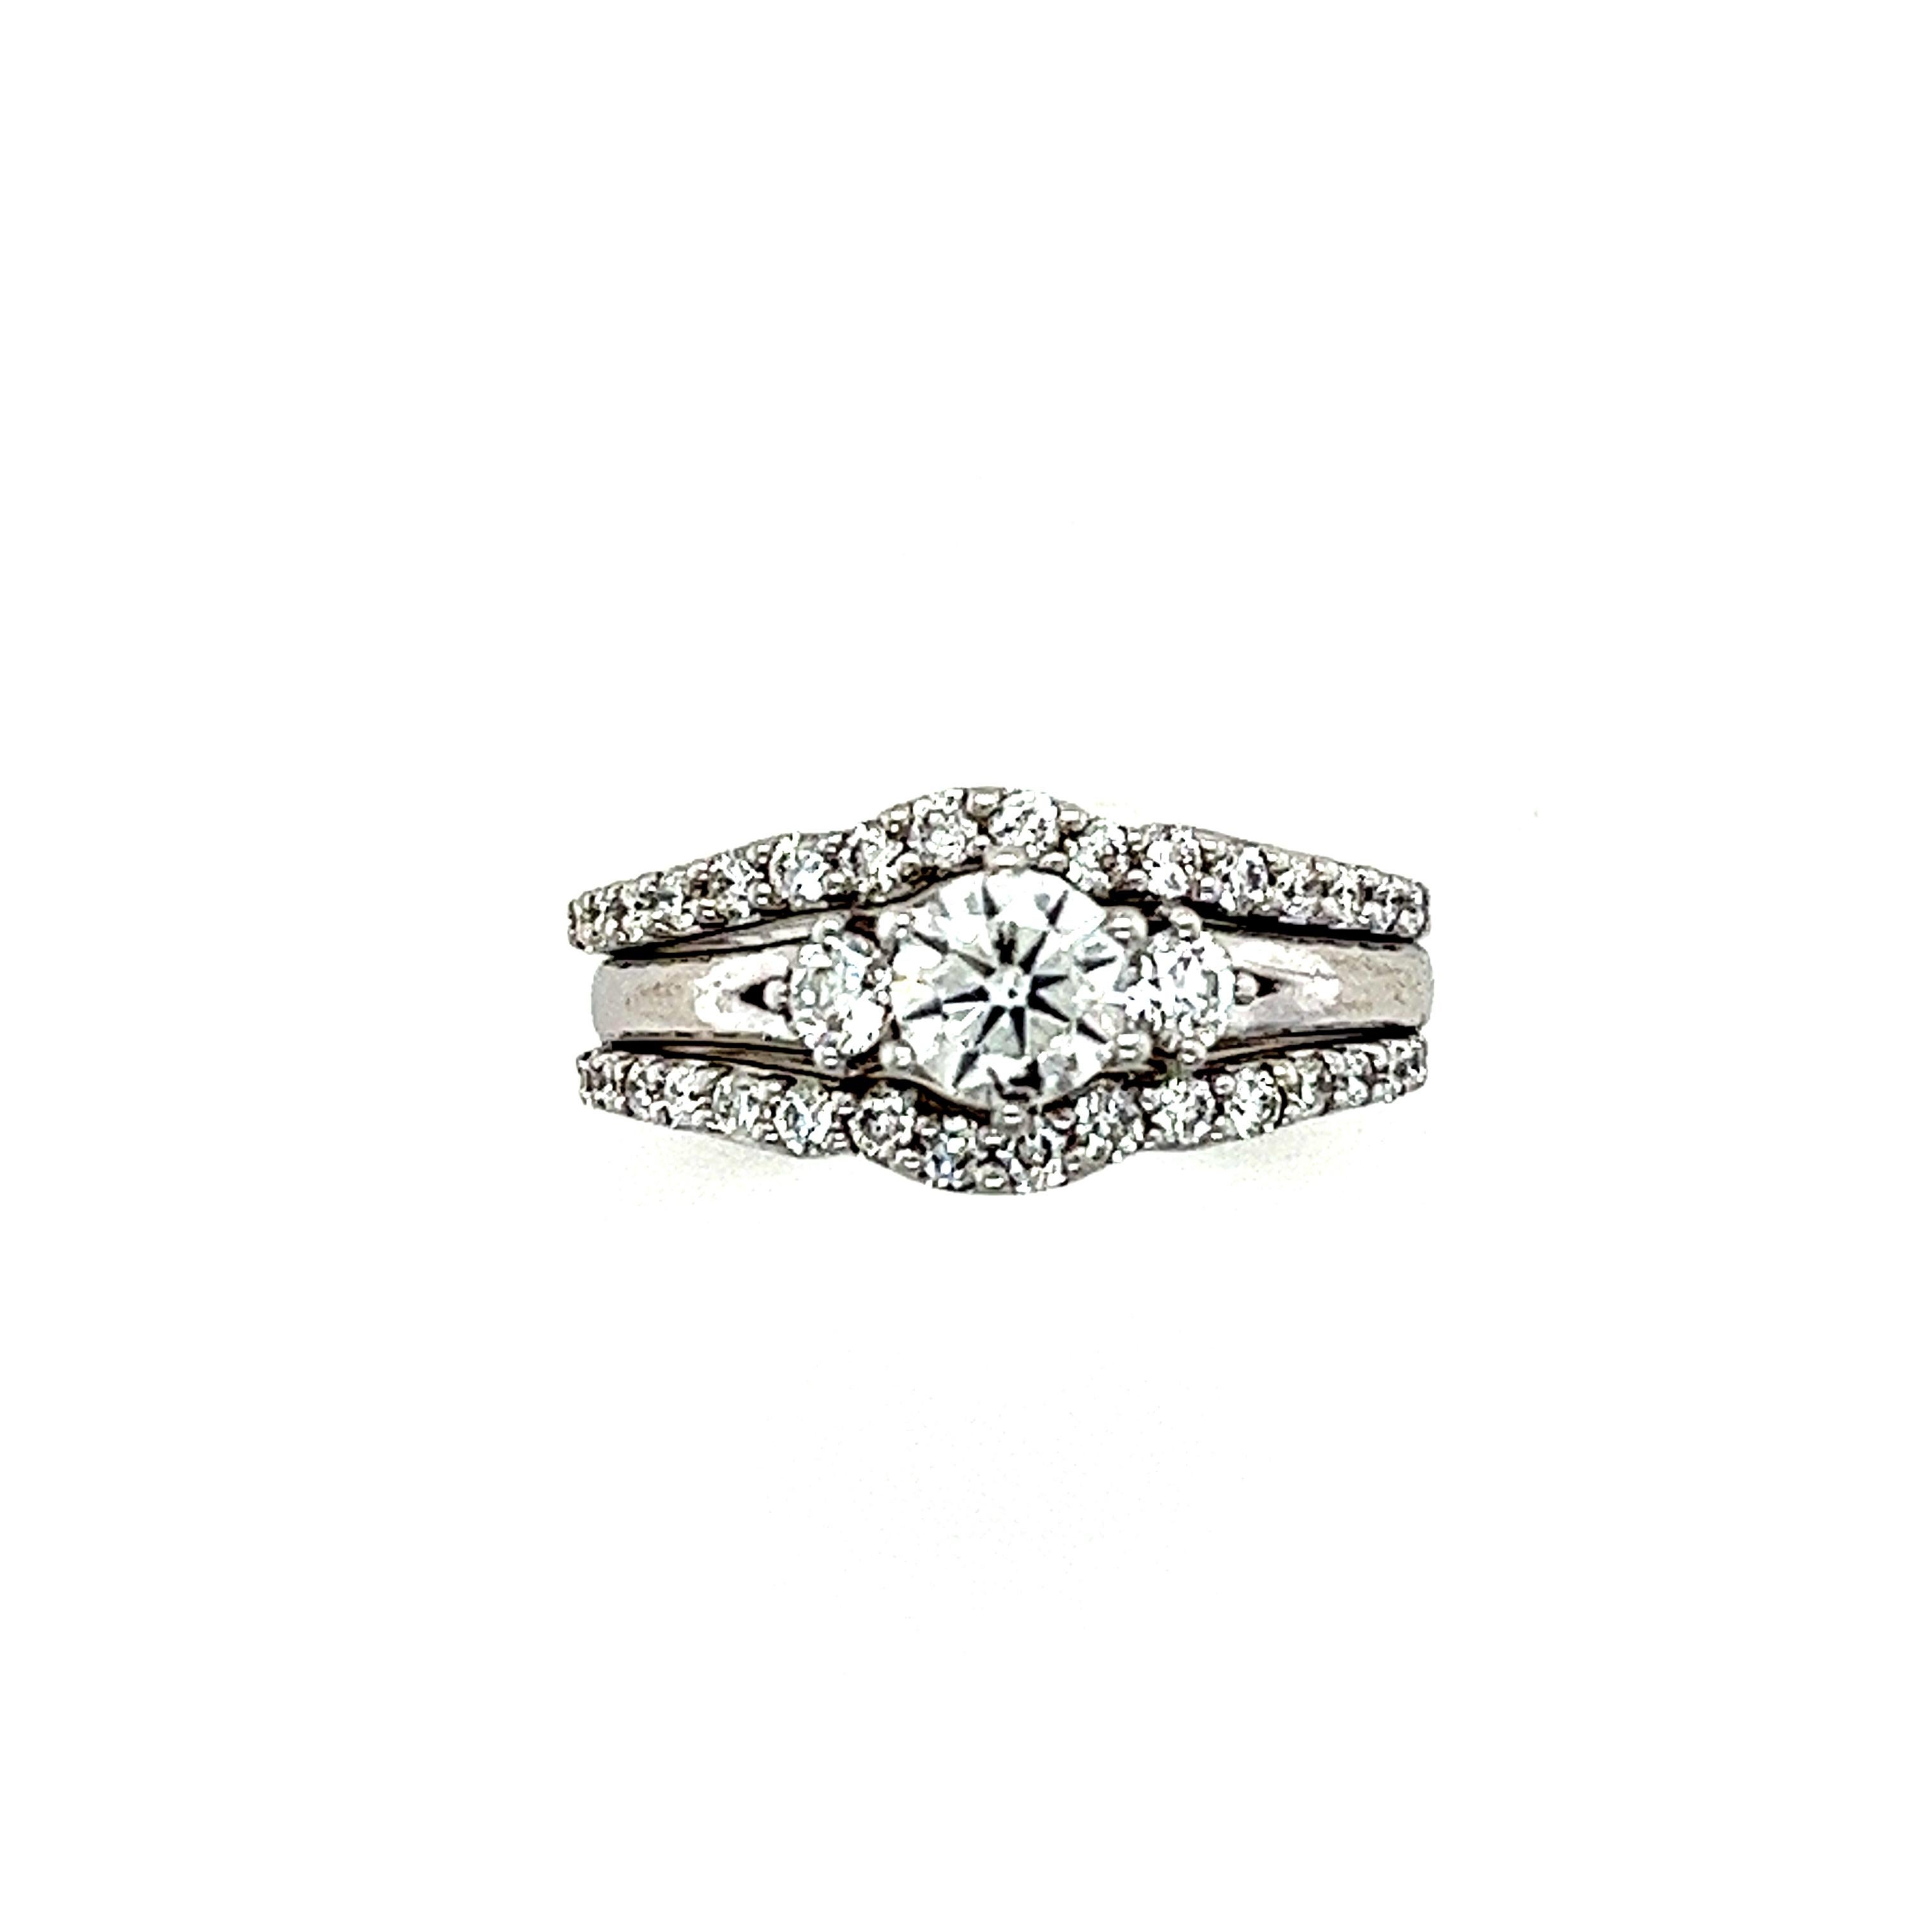 A Three-Piece Diamond Bridal Ring Joined Set with the centre engagement ring with 3 round brilliant cut diamonds within a border of 32 round brilliant cut diamonds all set in 18ct white gold.

Diamonds 1 = 0.46ct (estimated), graded in setting as